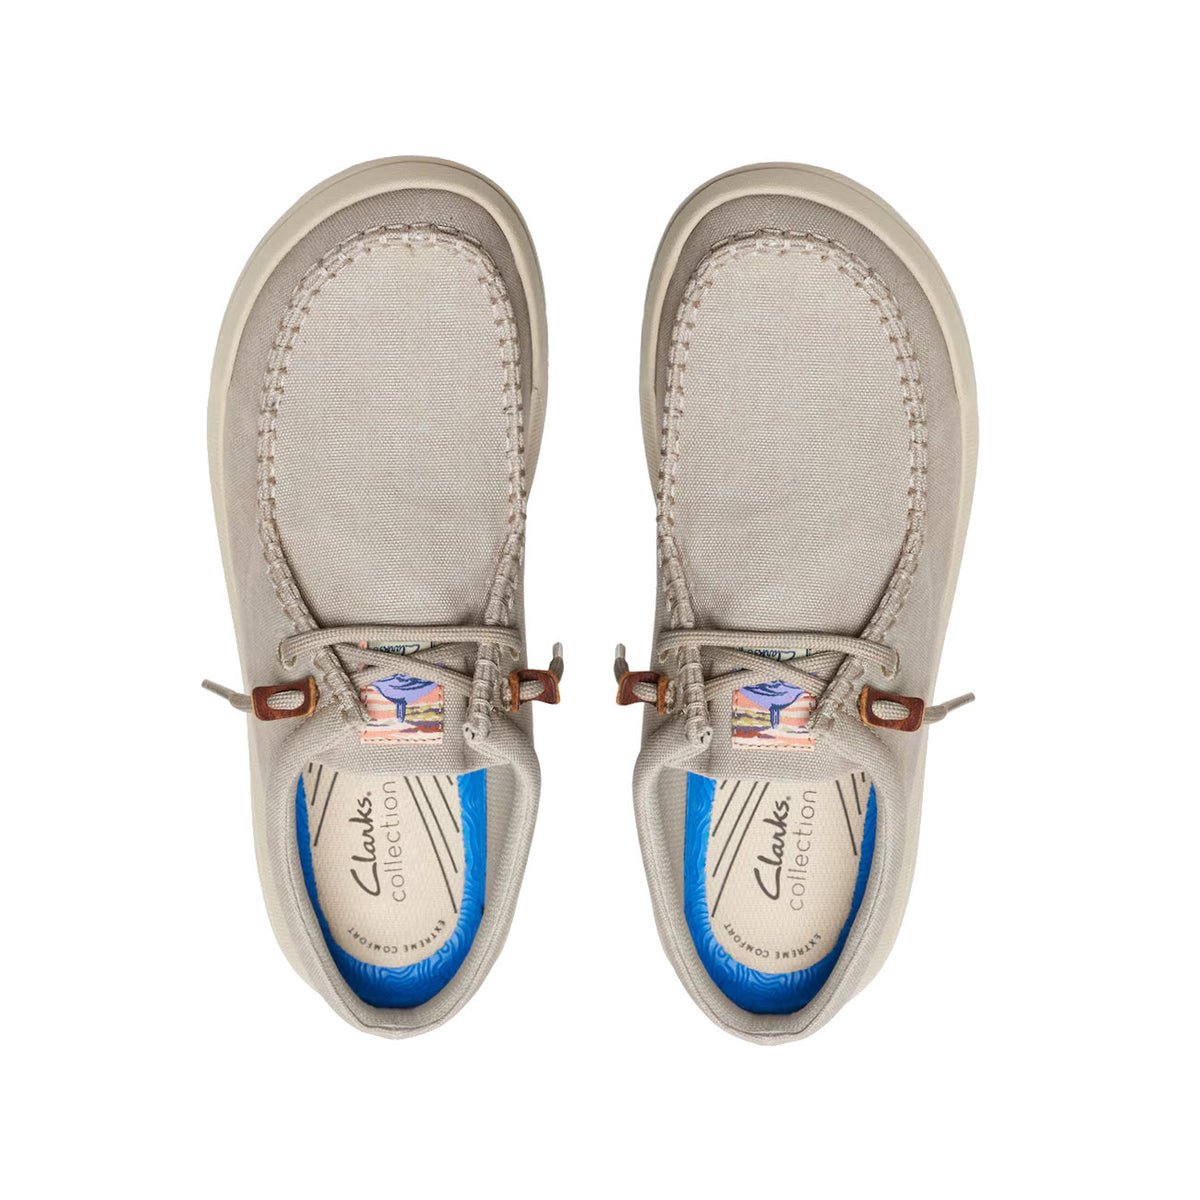 A pair of Clarks Driftlite Surf Slip On Moc light gray canvas slip-on shoes with brown leather accents and blue insoles, viewed from above on a white background.